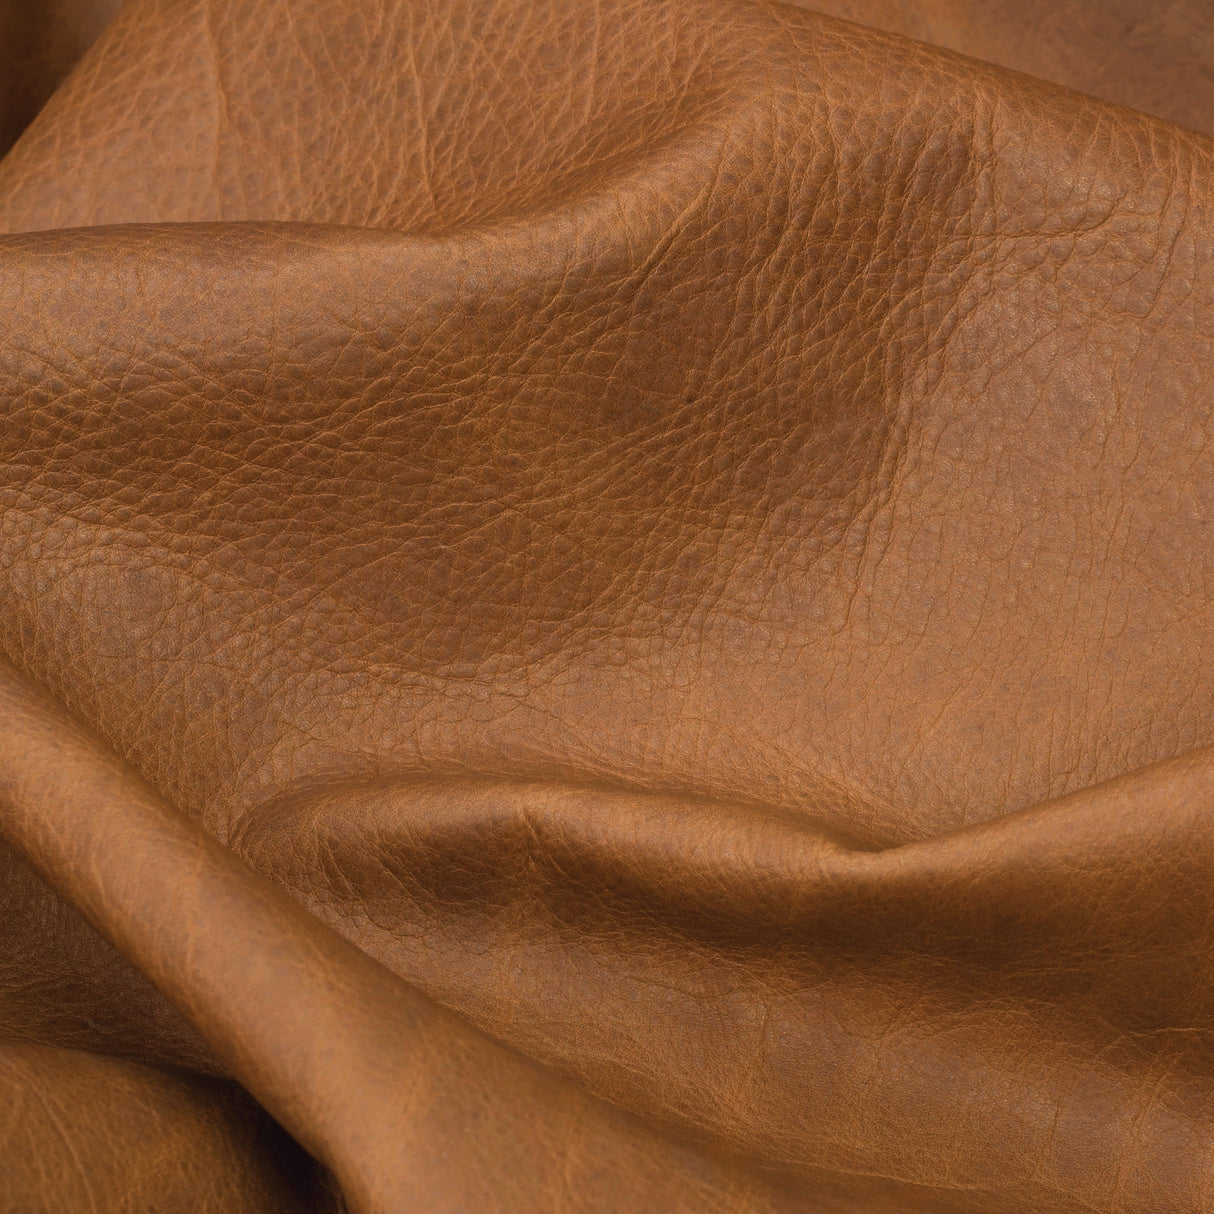 Light Weight Upholstery Leather - Full Leather Hide - 3 oz Cowhide 